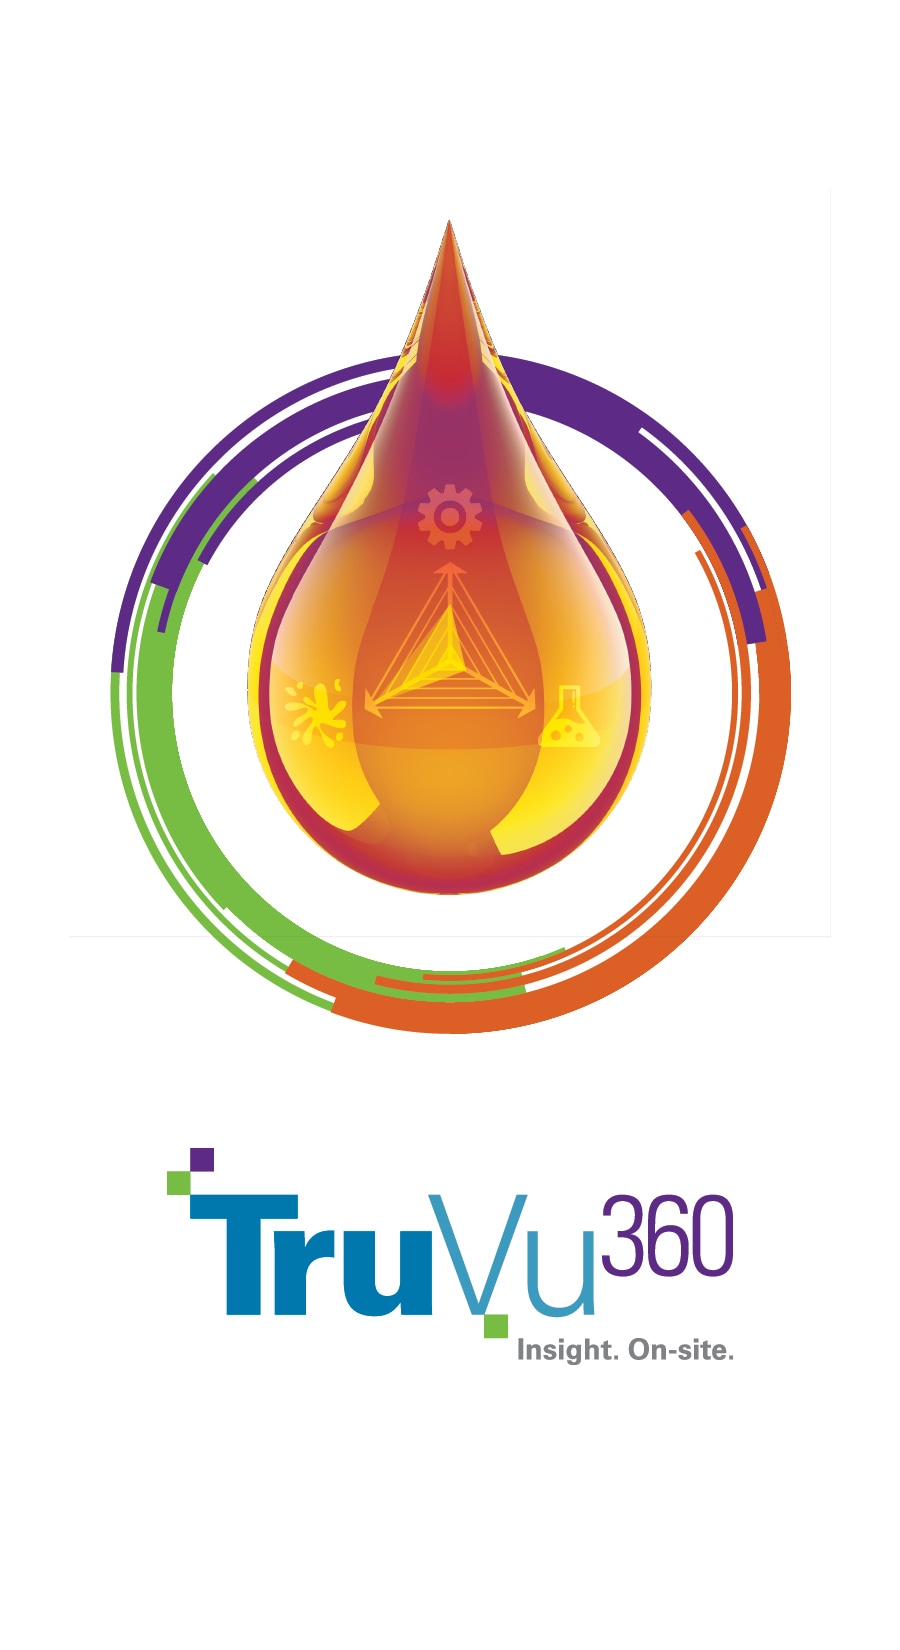 Spectro Scientific Introduces TruVu 360™ Enterprise Fluid Intelligence Platform A New and Holistic Approach to On-Site Oil Analysis